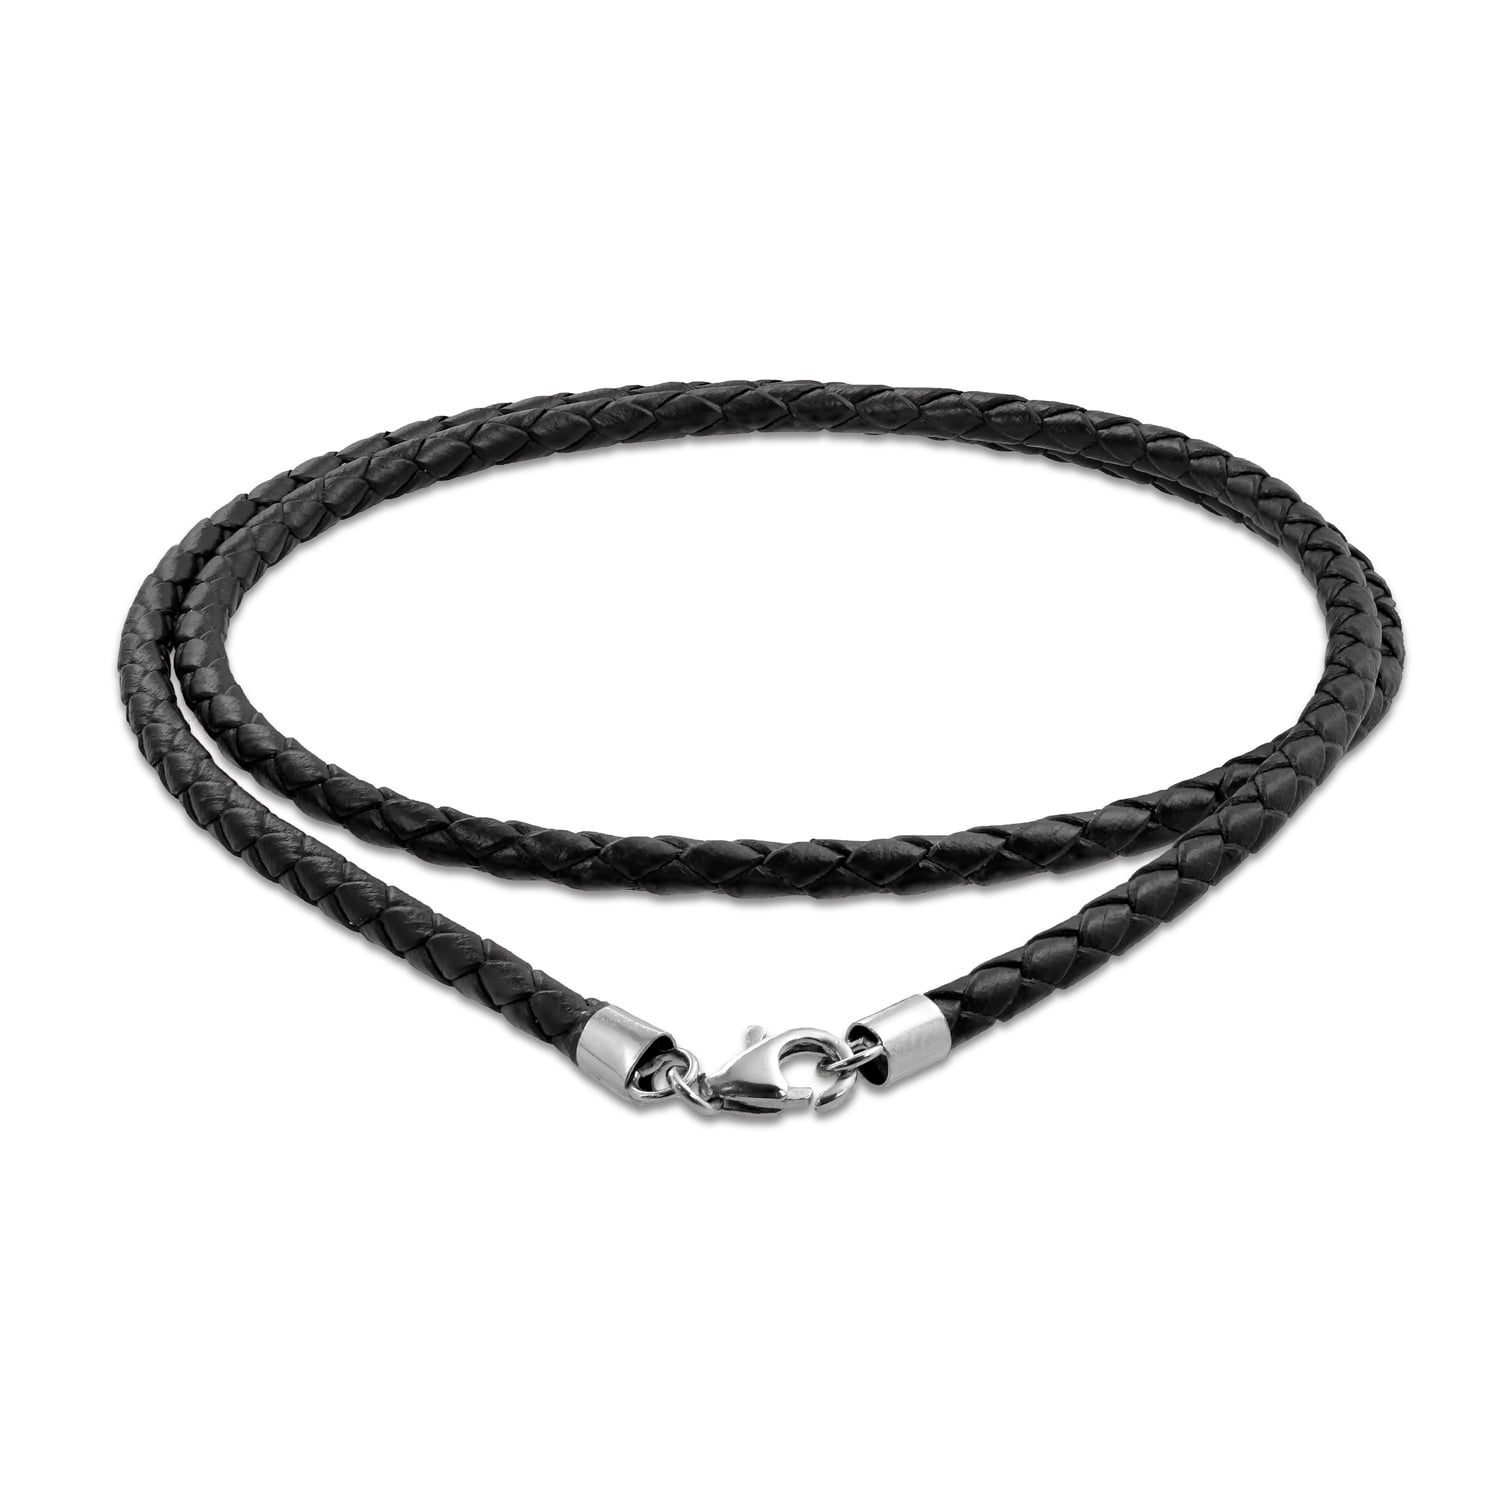 3mm Black Braided Leather Cord Chain with 14k Gold Clasp Necklace